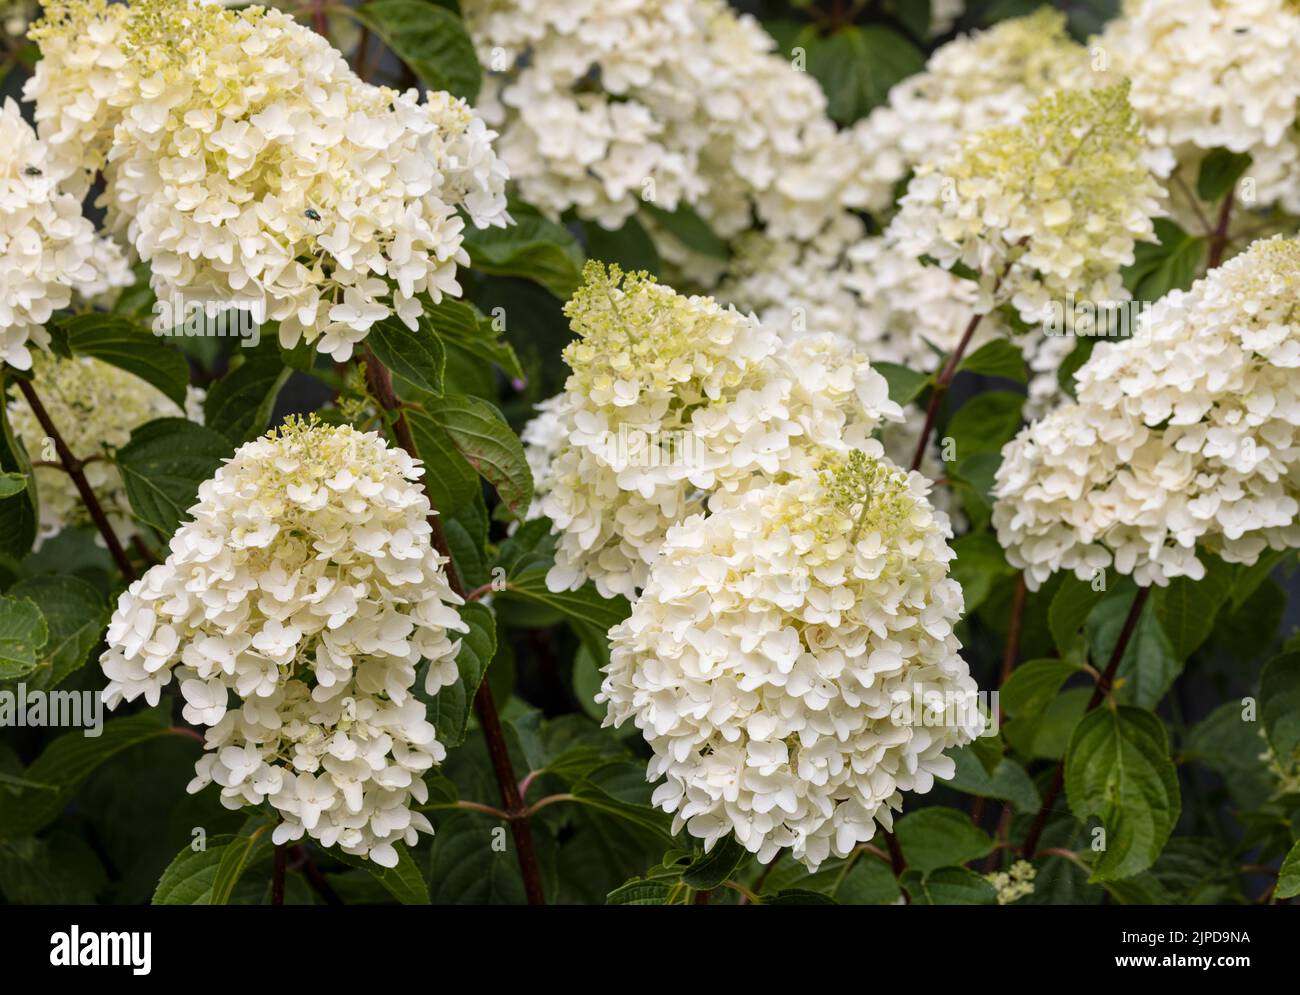 A mass of large flower-heads of a white Hydrangea plant Stock Photo